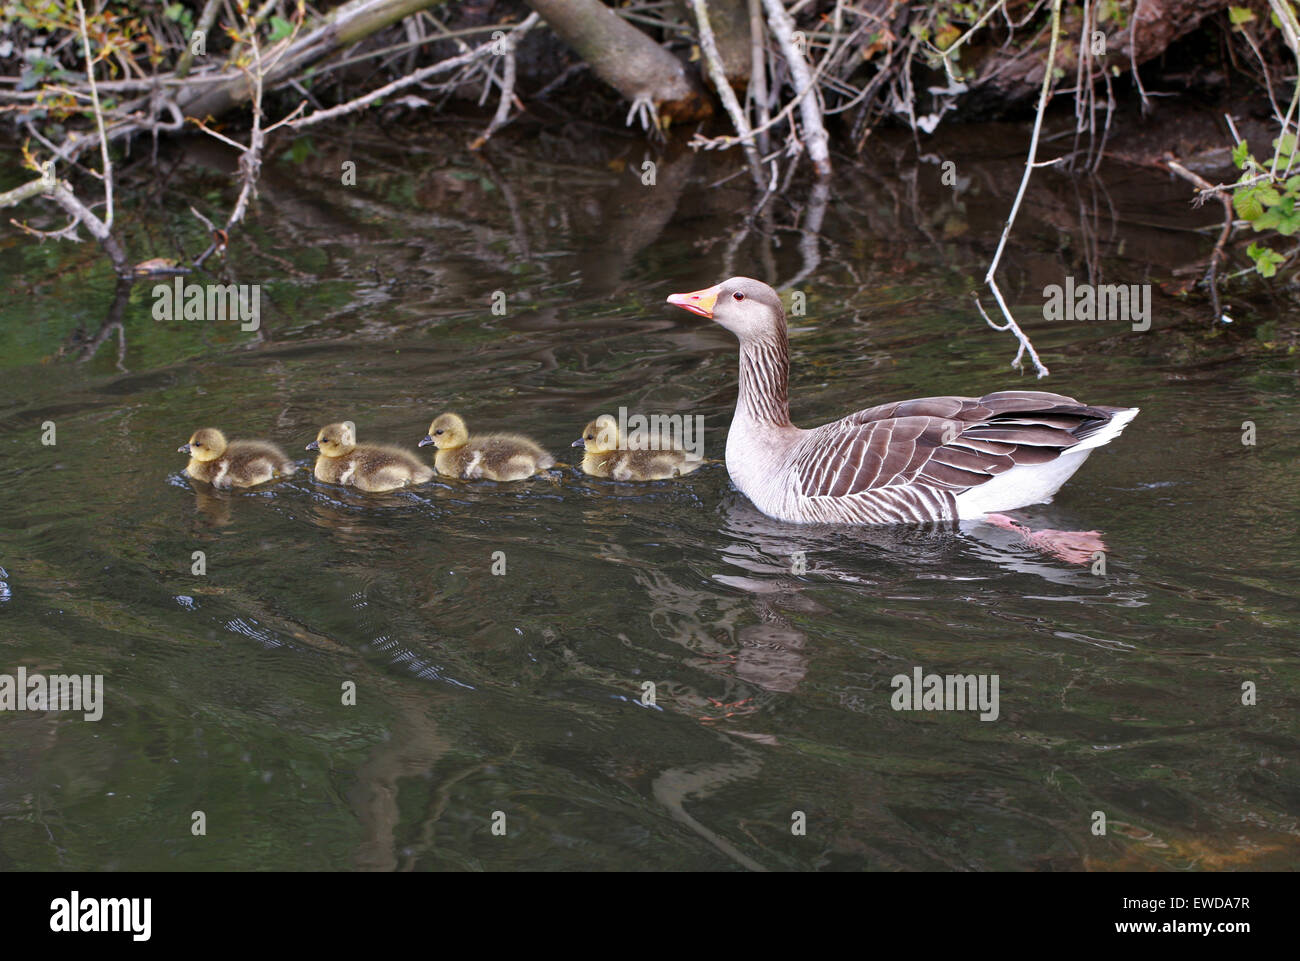 Family of Wild Greylag Geese, Anser anser, Anatidae. Swimming on a River with Four Goslings. Stock Photo